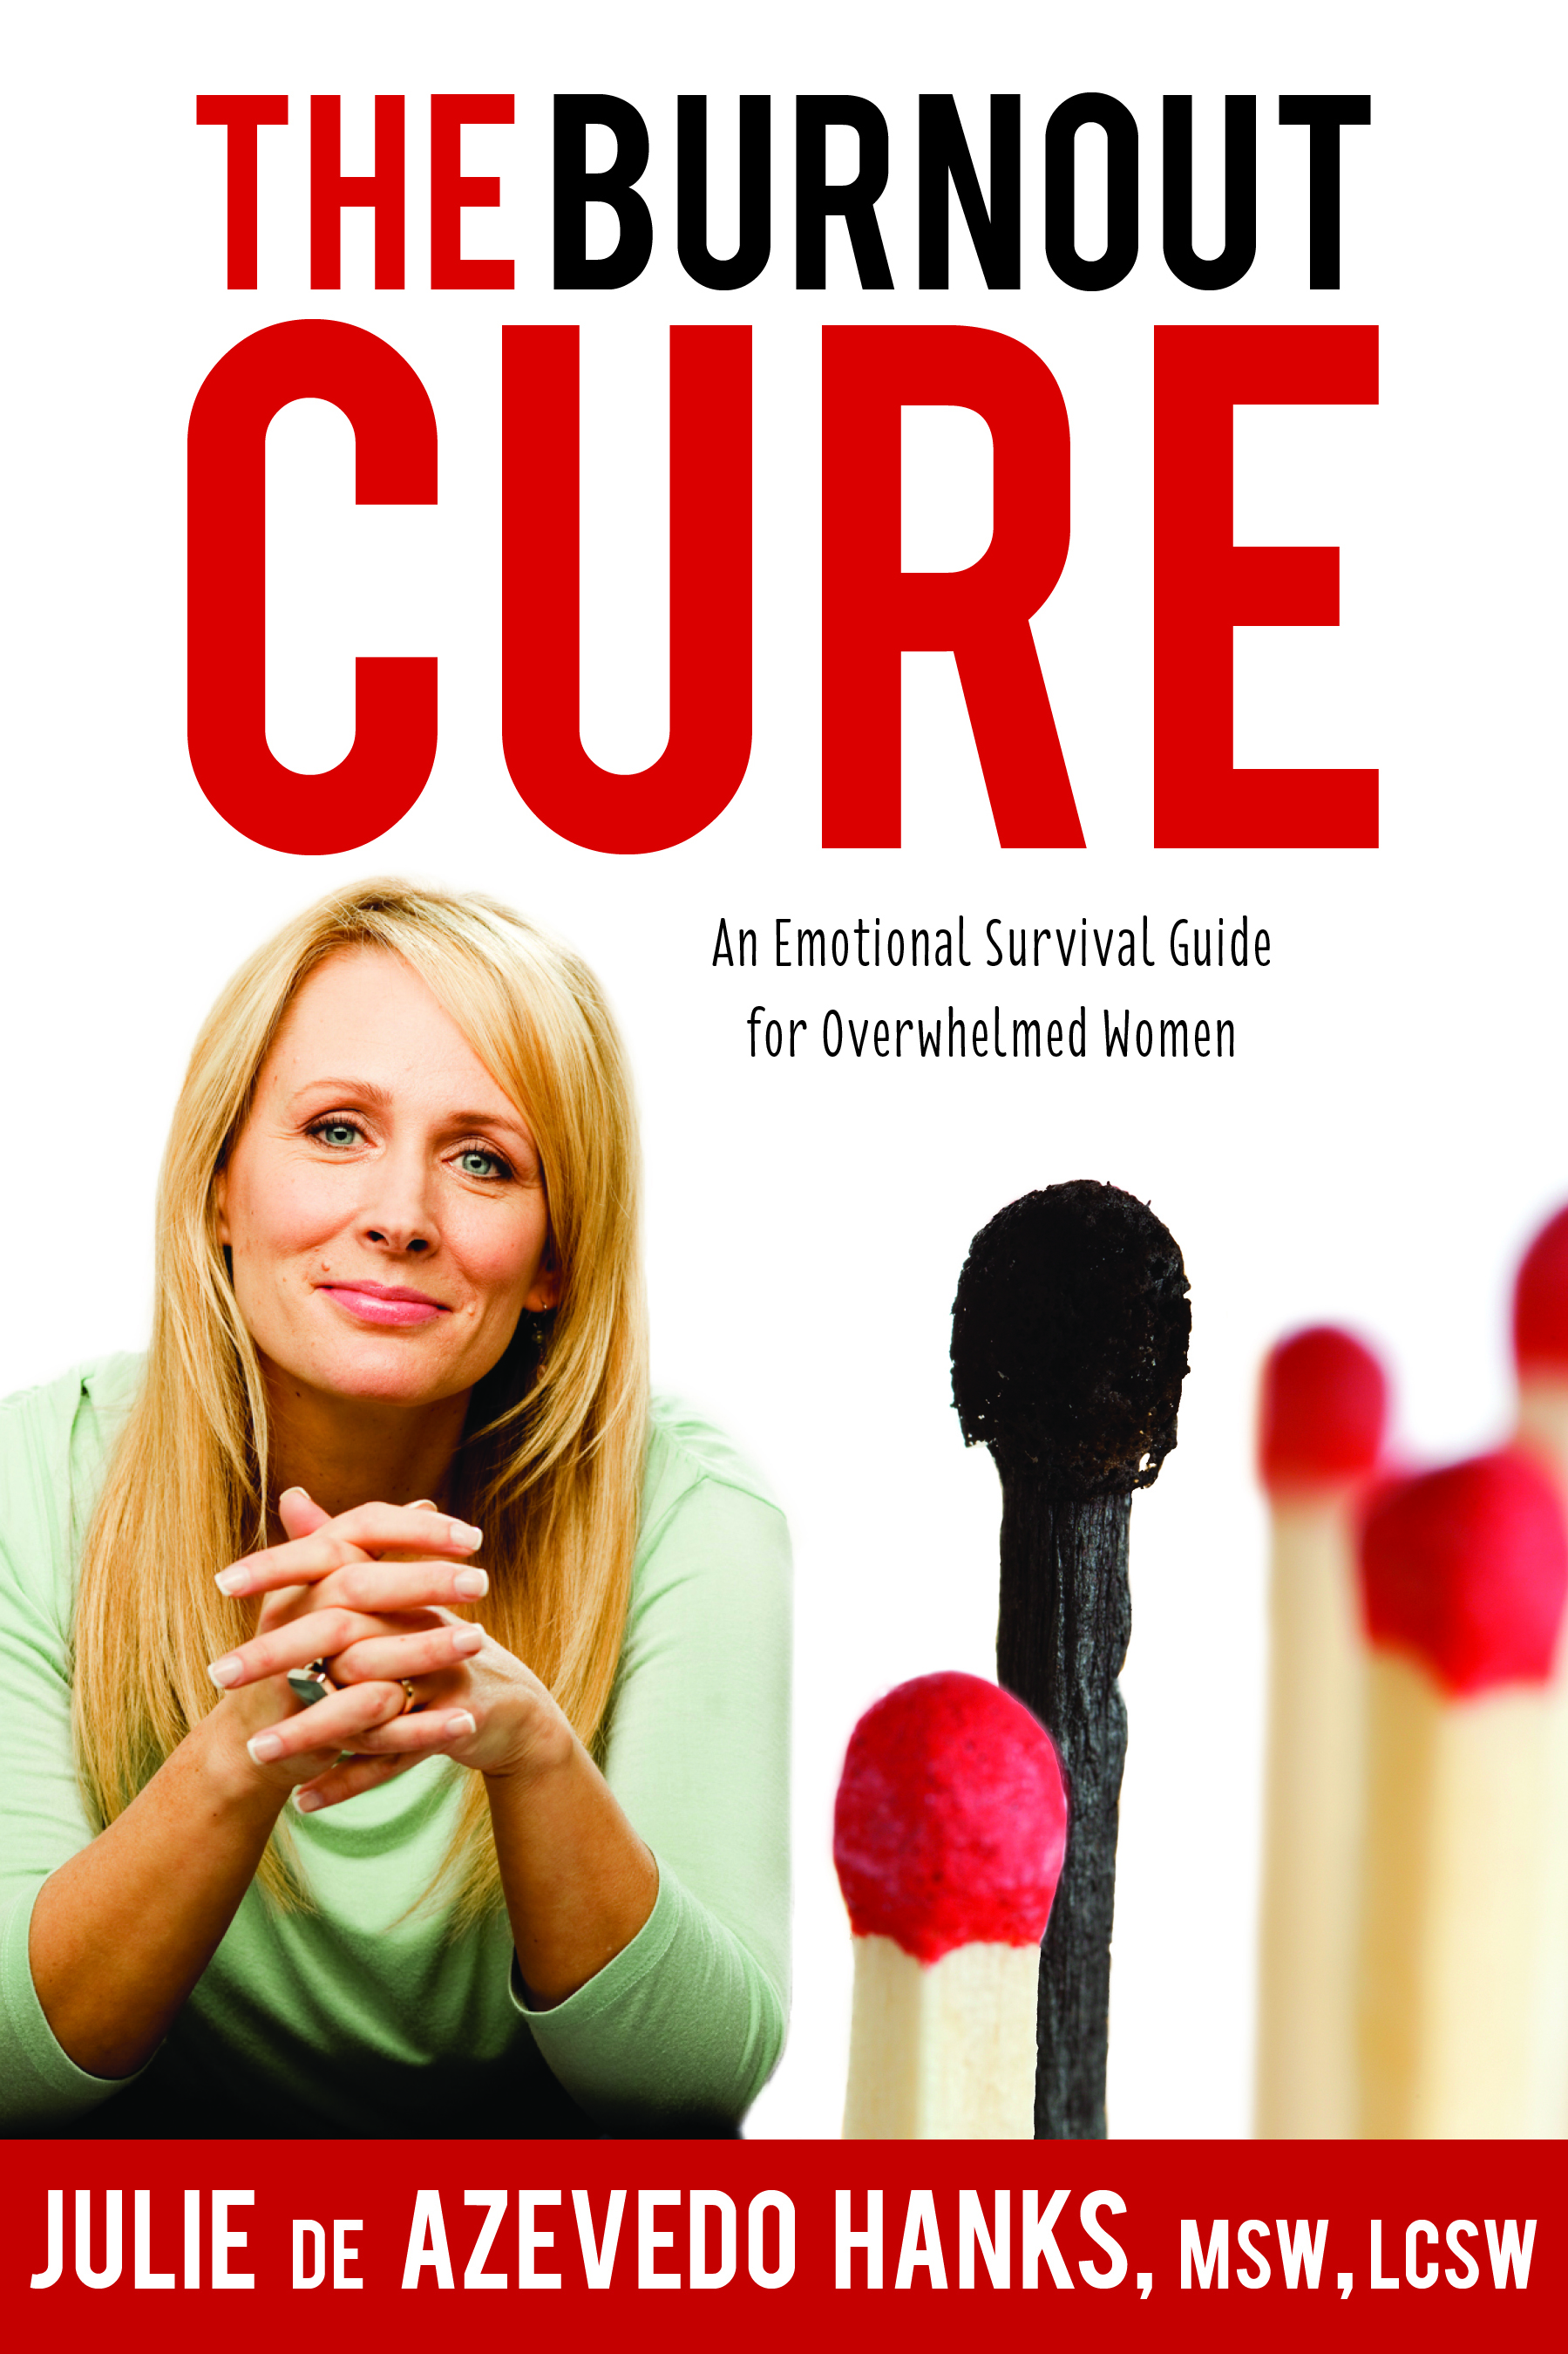 Author of The Burnout Cure